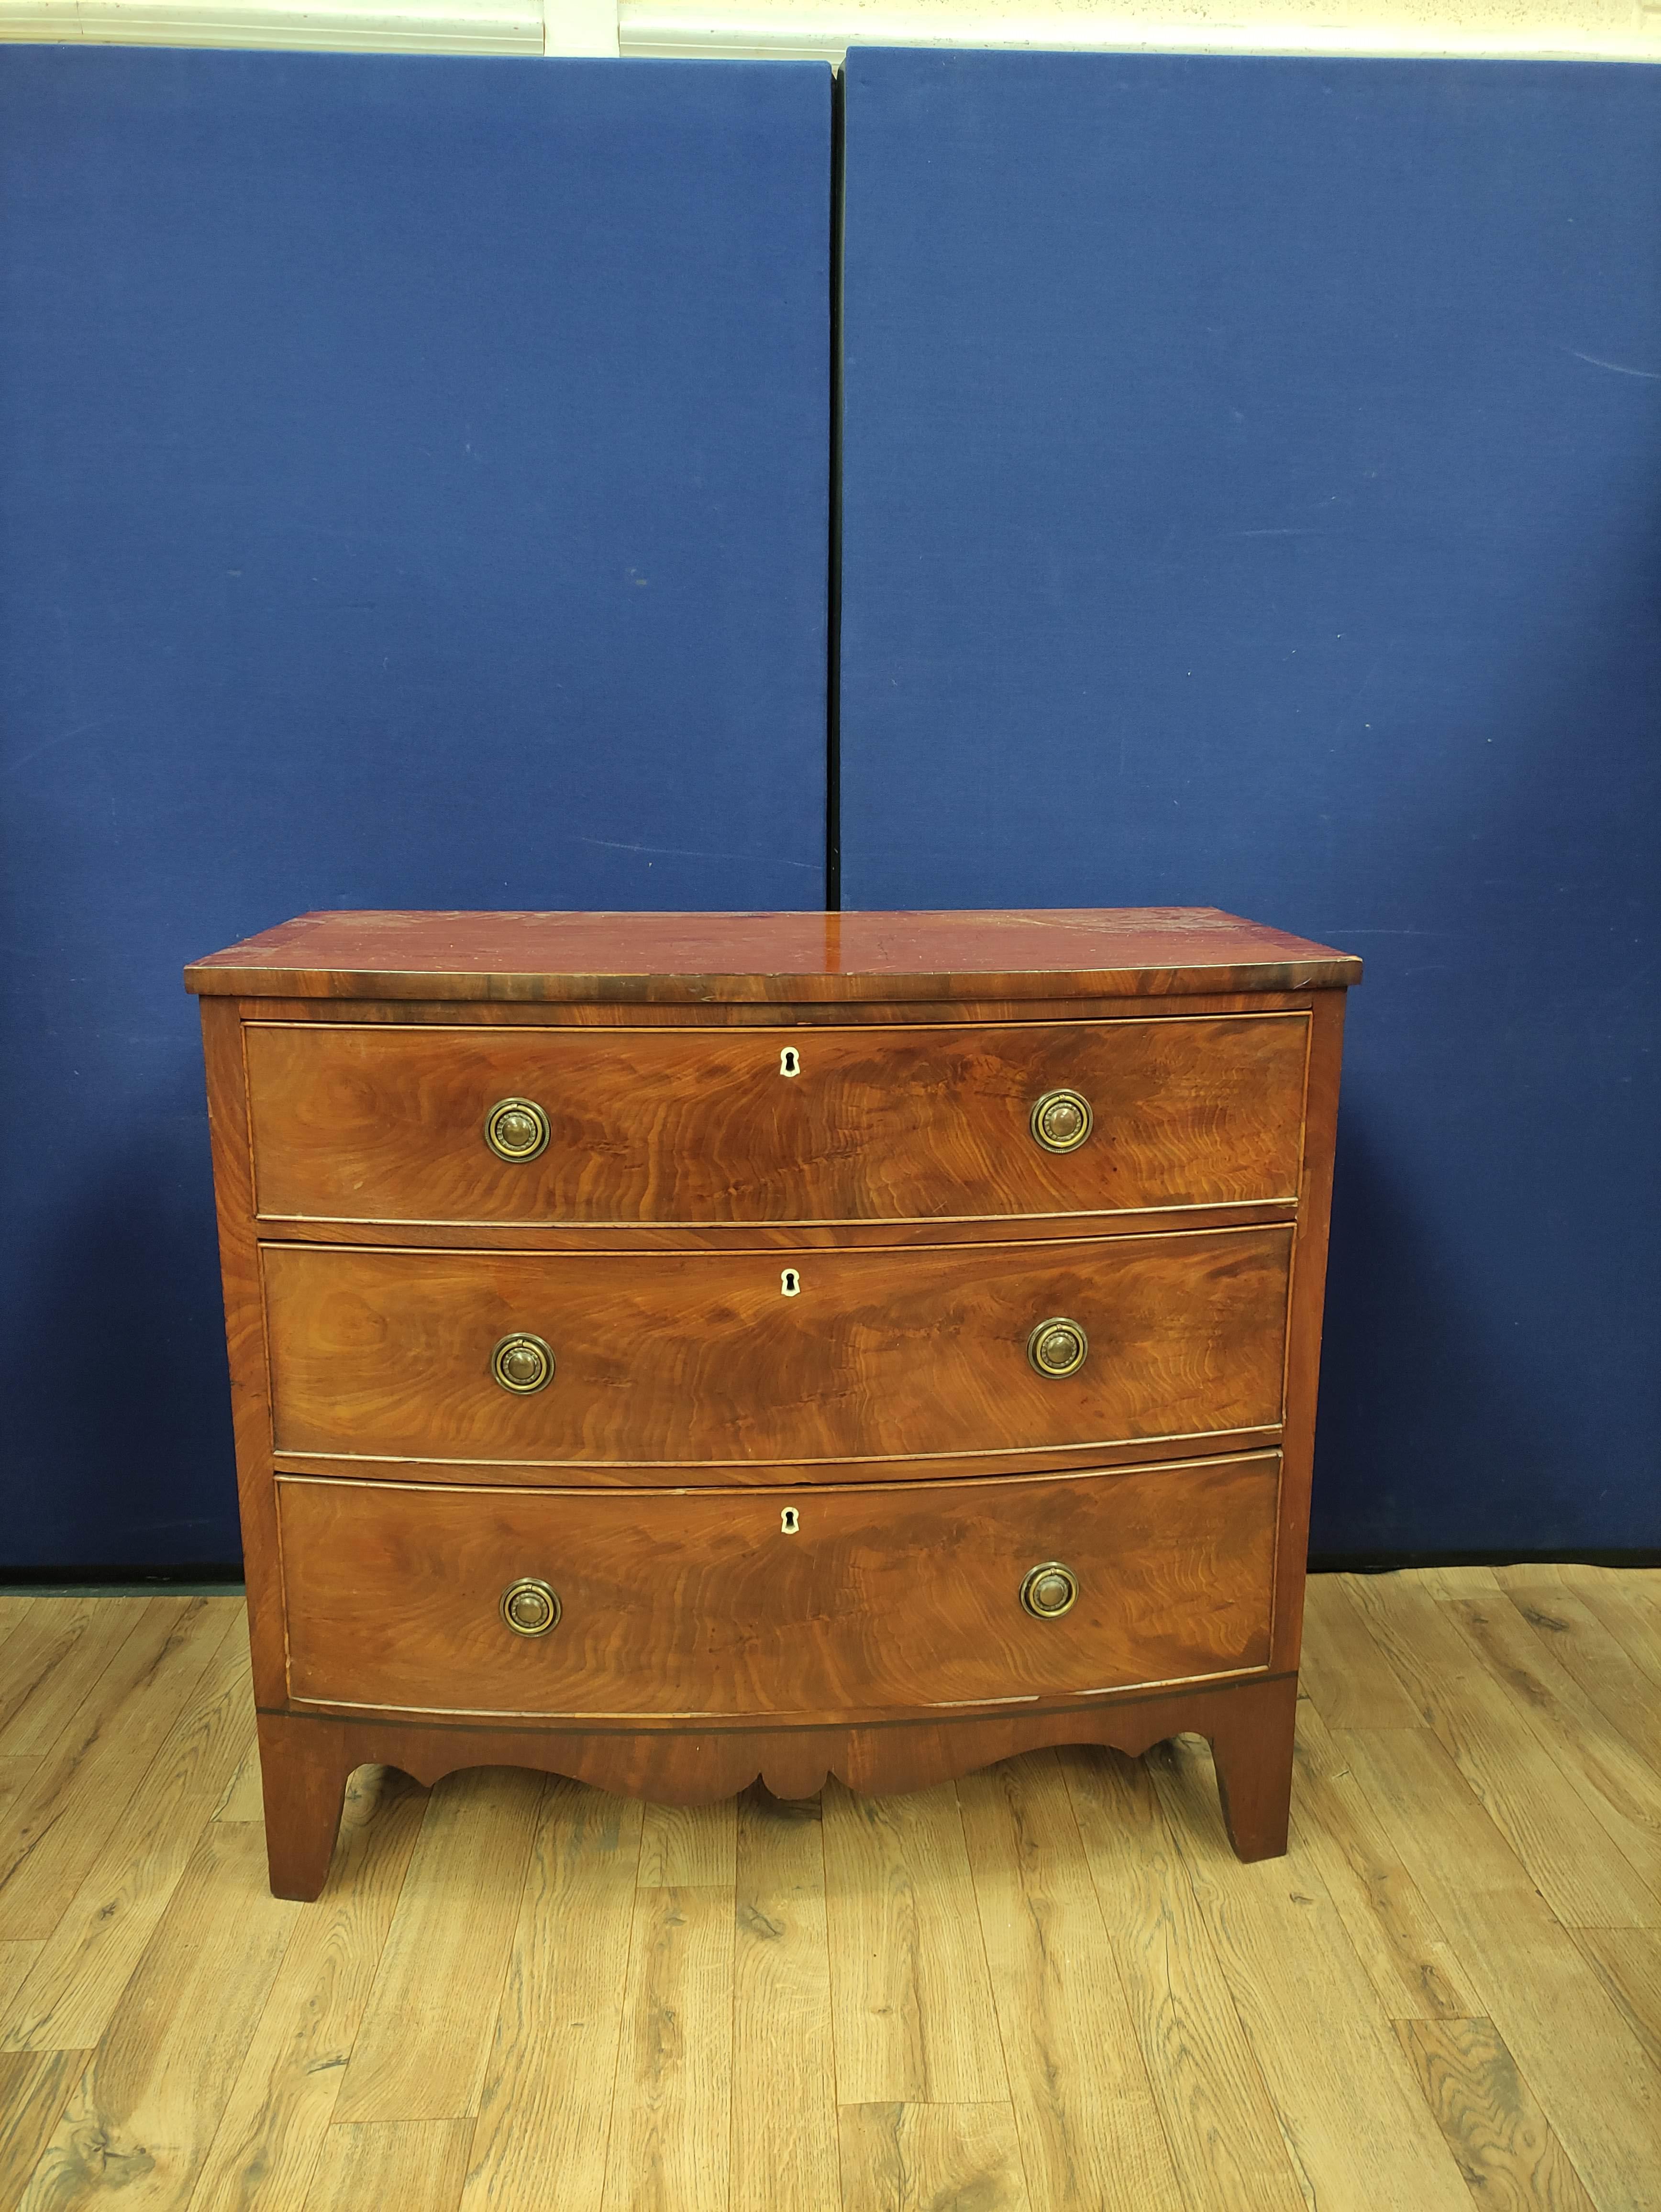 Georgian mahogany chest of drawers circa early 19th century, with three long drawers raised on